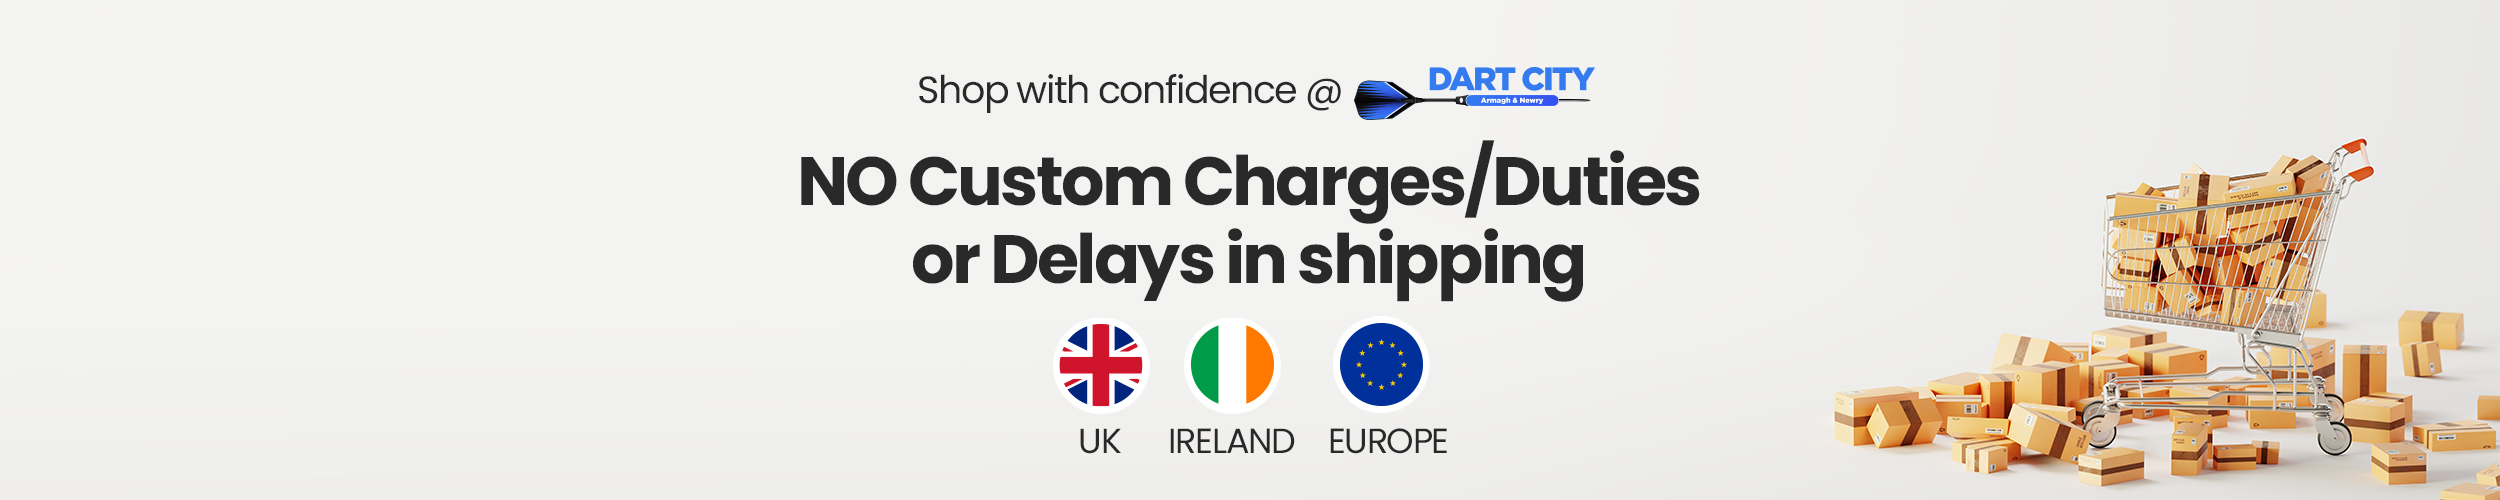 No Customs charges/Duties to Ireland or Europe